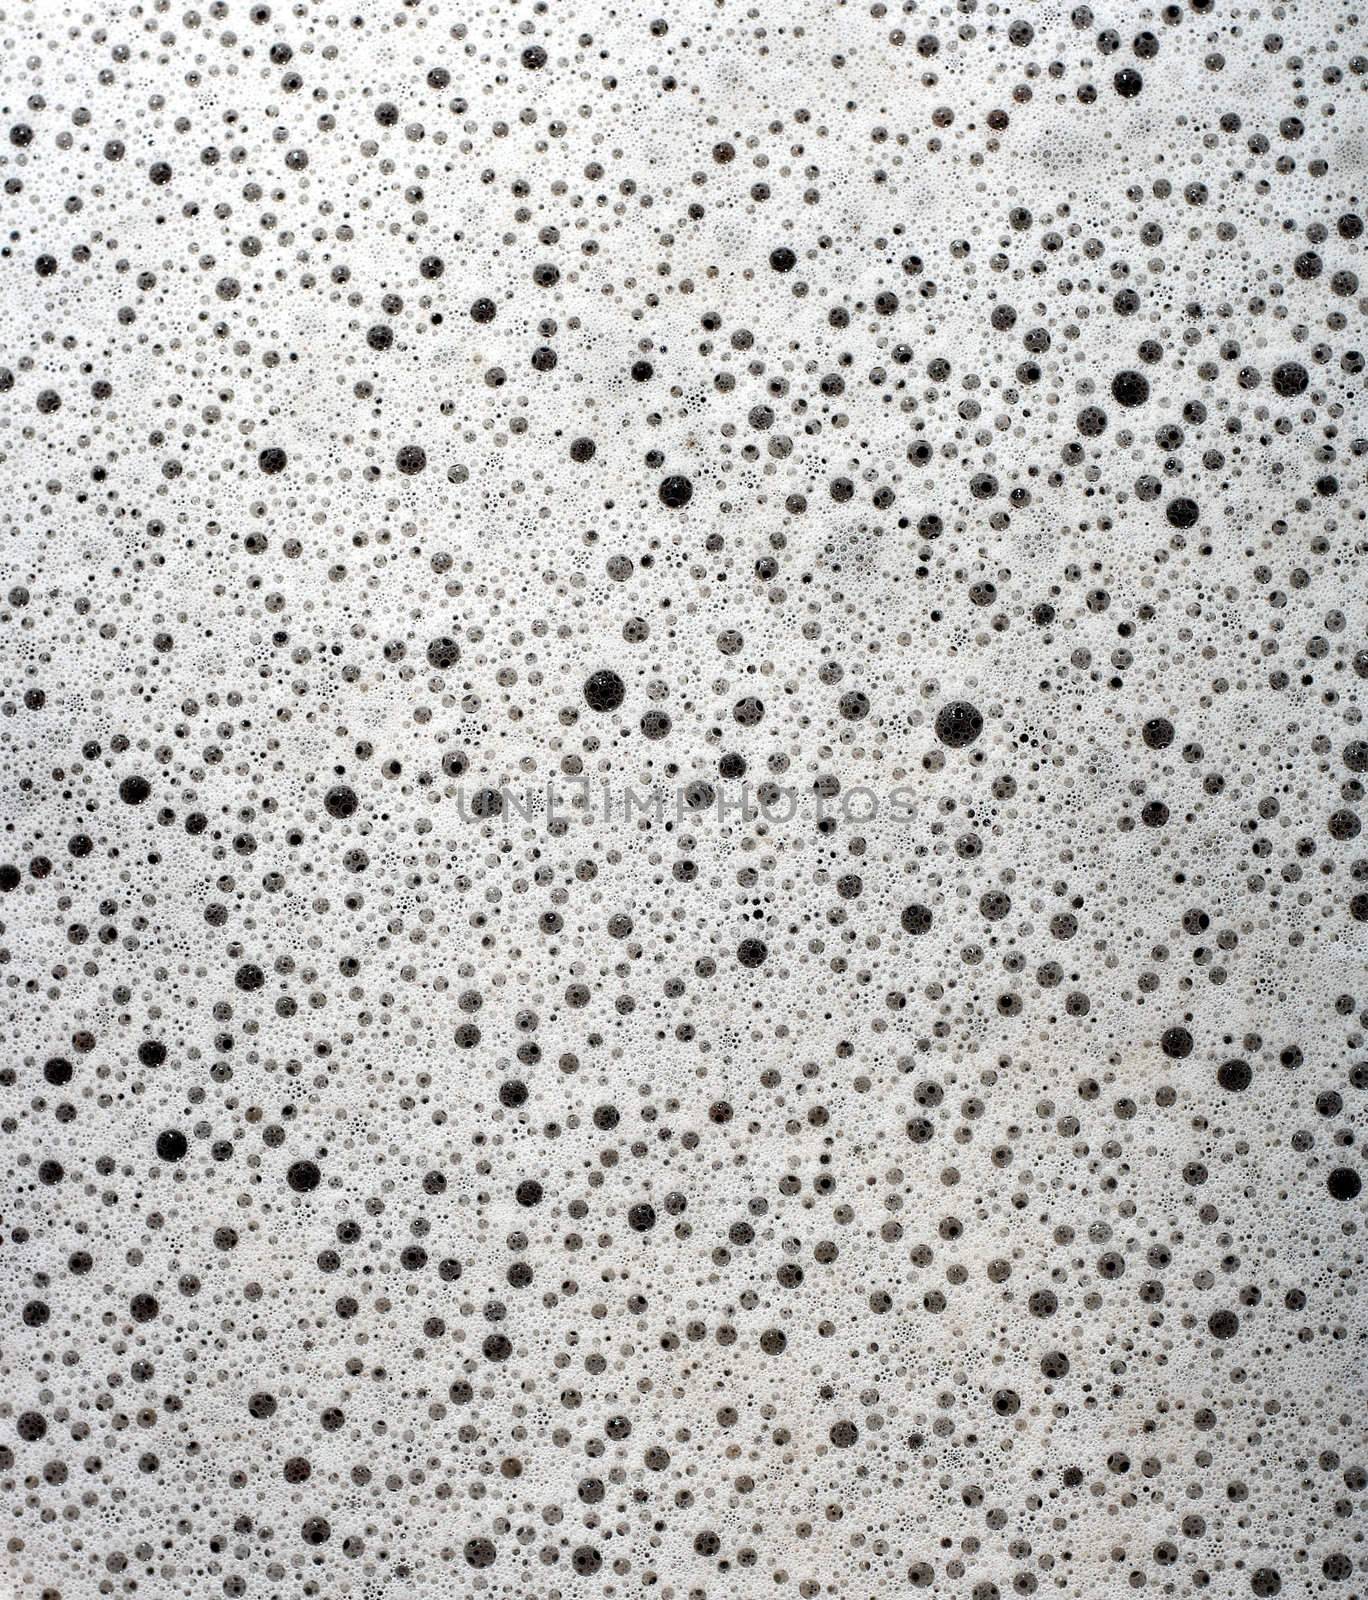 Bubbles of dirty soapy water background. by pashabo